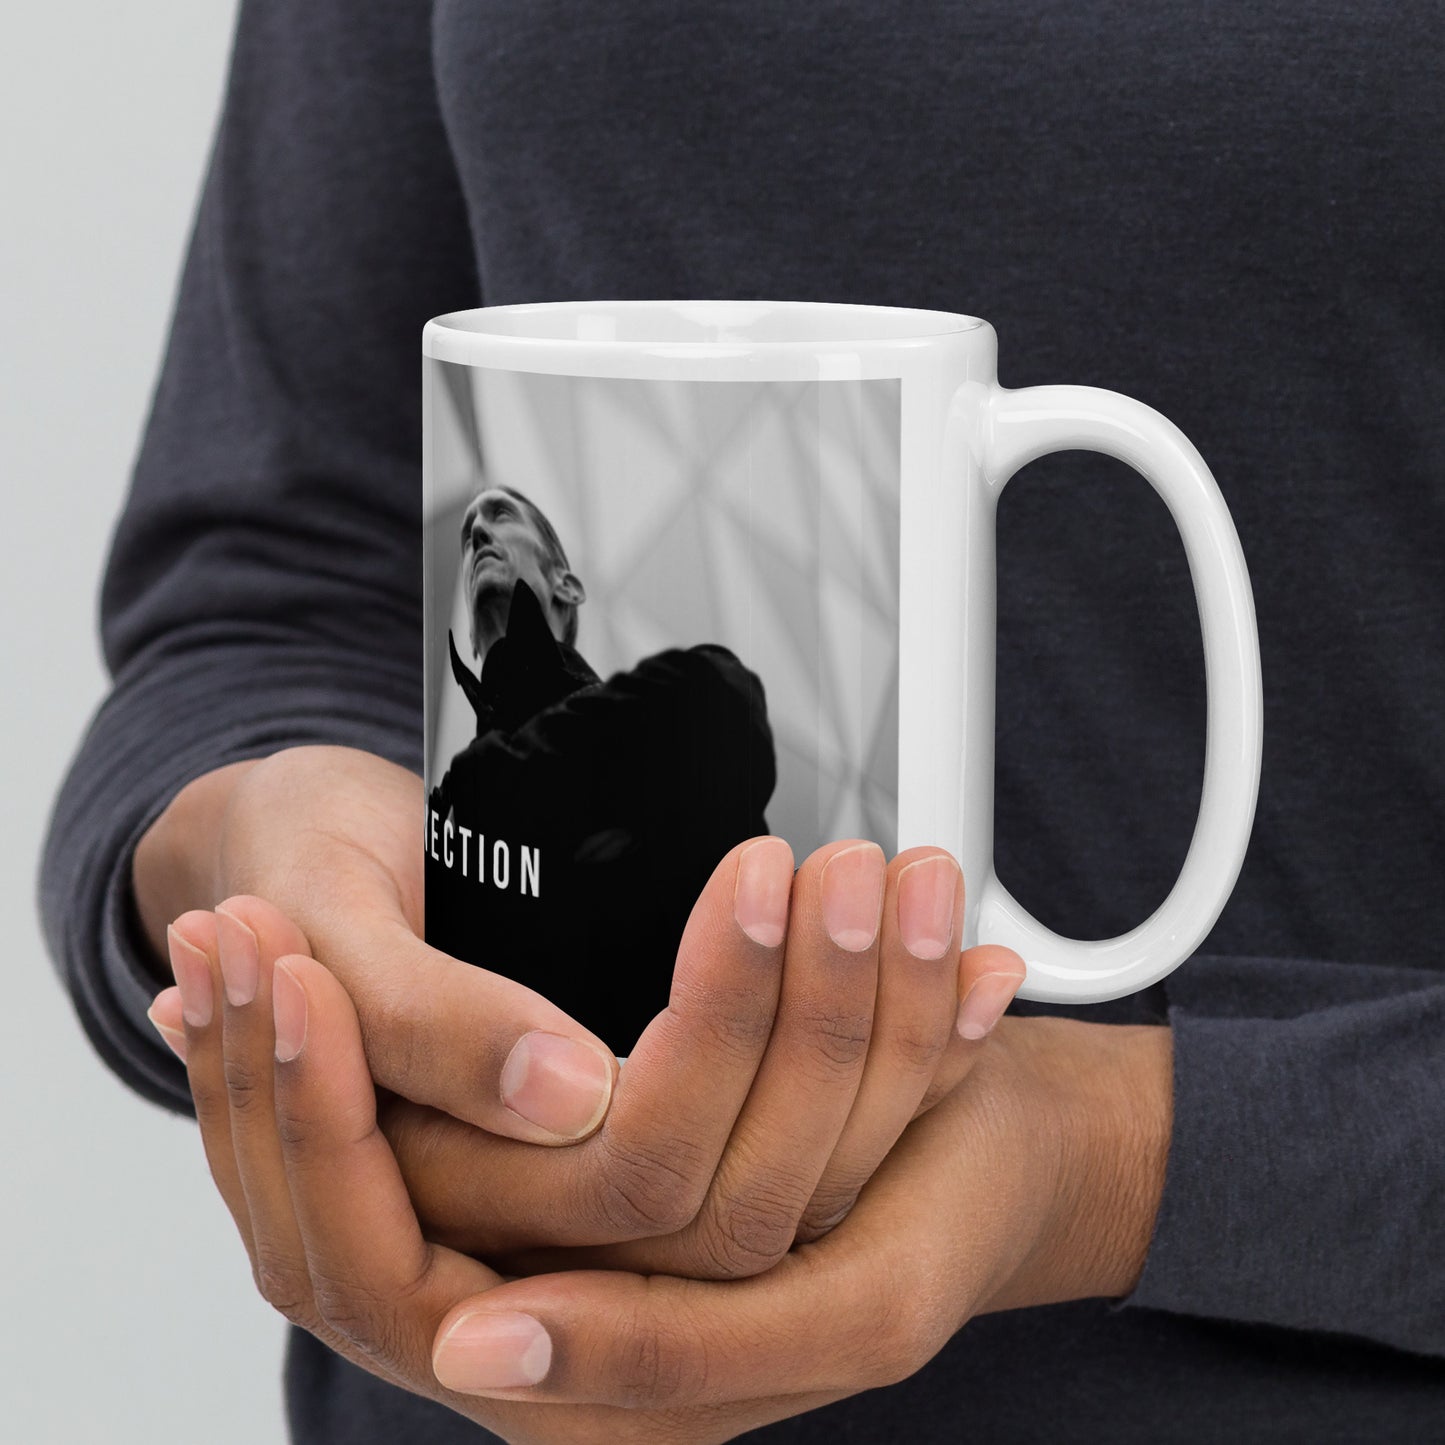 Cold Connection, official band photo, White glossy mug